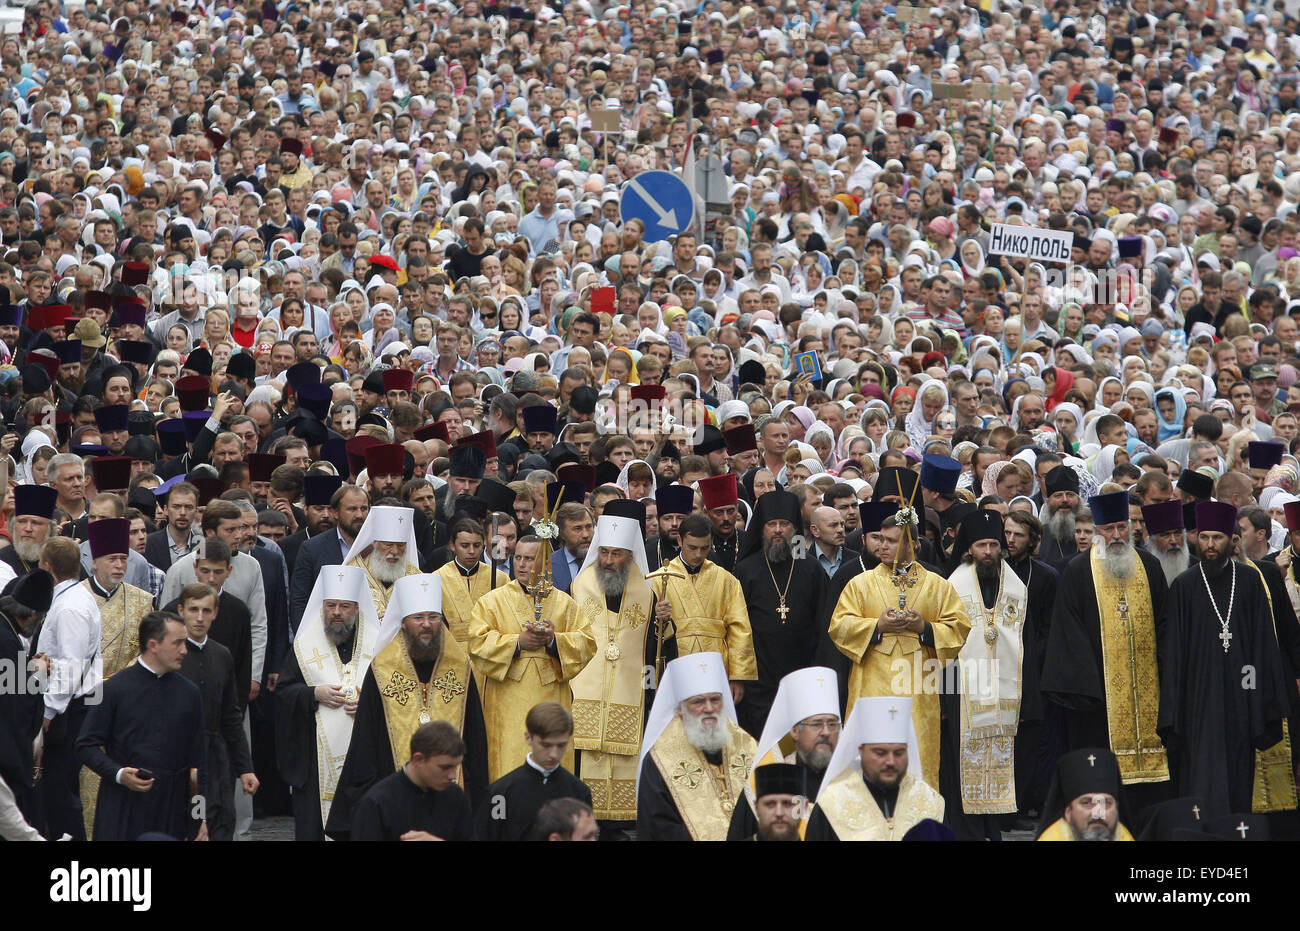 July 27, 2015 - Kiev, Ukraine - Metropolitan Onufry, head of the Ukrainian Orthodox Church of Moscow Patriarchate, takes part in religious procession marking the 1000th anniversary of the Repose of Vladimir the Great at St. Vladimirs Hill in Kiev, Ukraine, 27 July 2015. The Grand Prince of Kiev, Vladimir the Great, also known as St. Vladimir, Vladimir the Baptizer of Rus and Vladimir the Red Sun, was the first Christian ruler in the Kievan Rus who christianized the region. Orthodox believers will mark the 1027th anniversary of Kievan Rus Christianization on 28 July. (Credit Image: © Serg Glovn Stock Photo